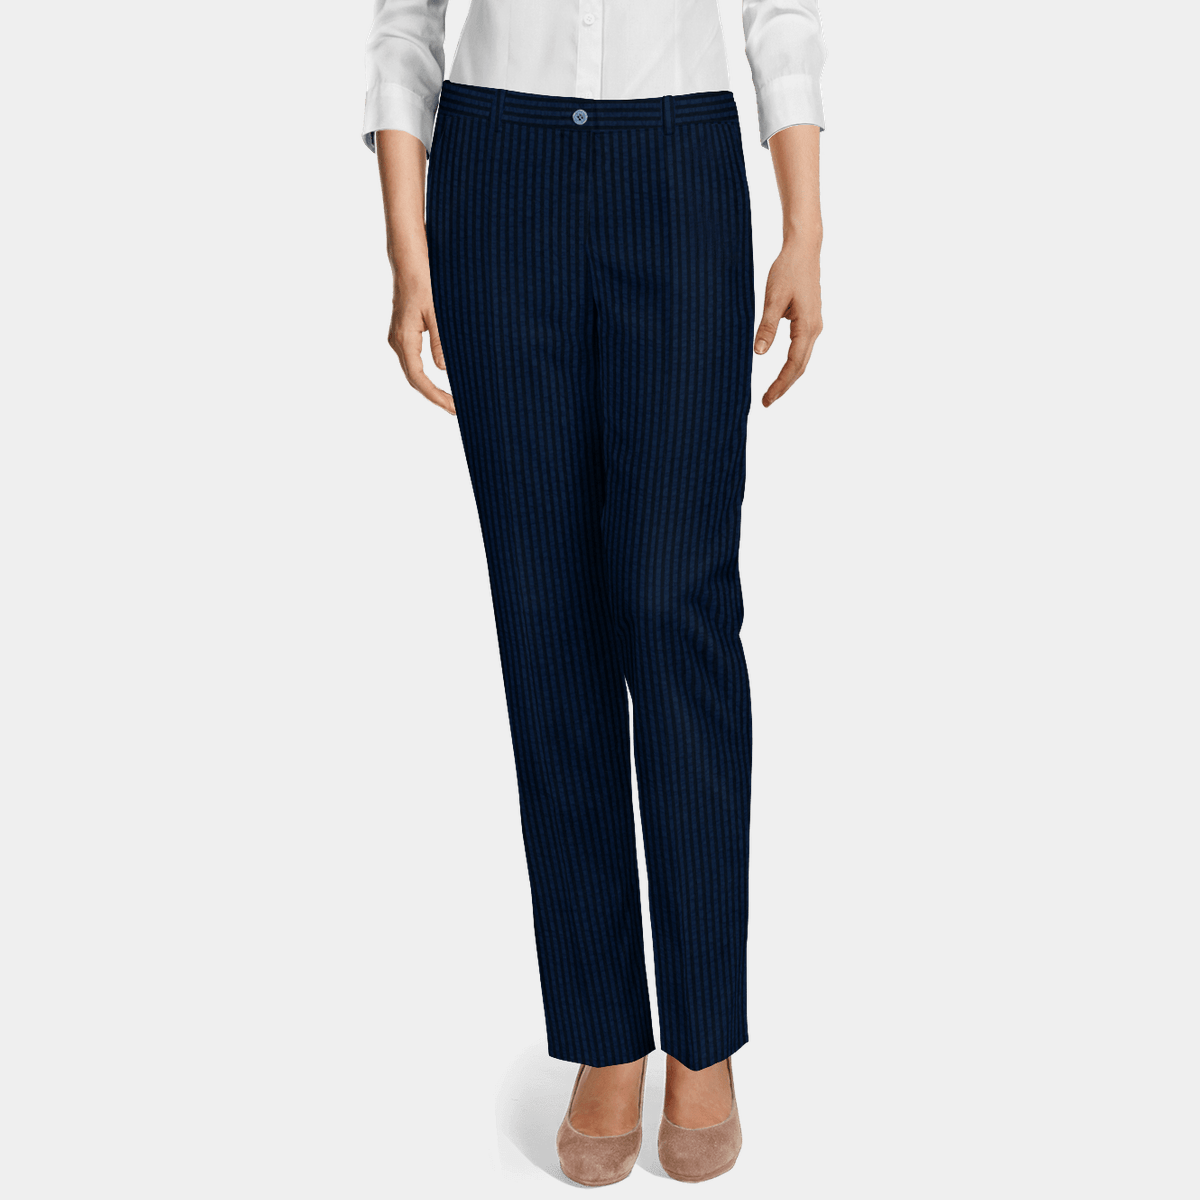 Christal Pullon Pintuck Dress Pant  Miik  Sustainable womens fashion  made in Canada